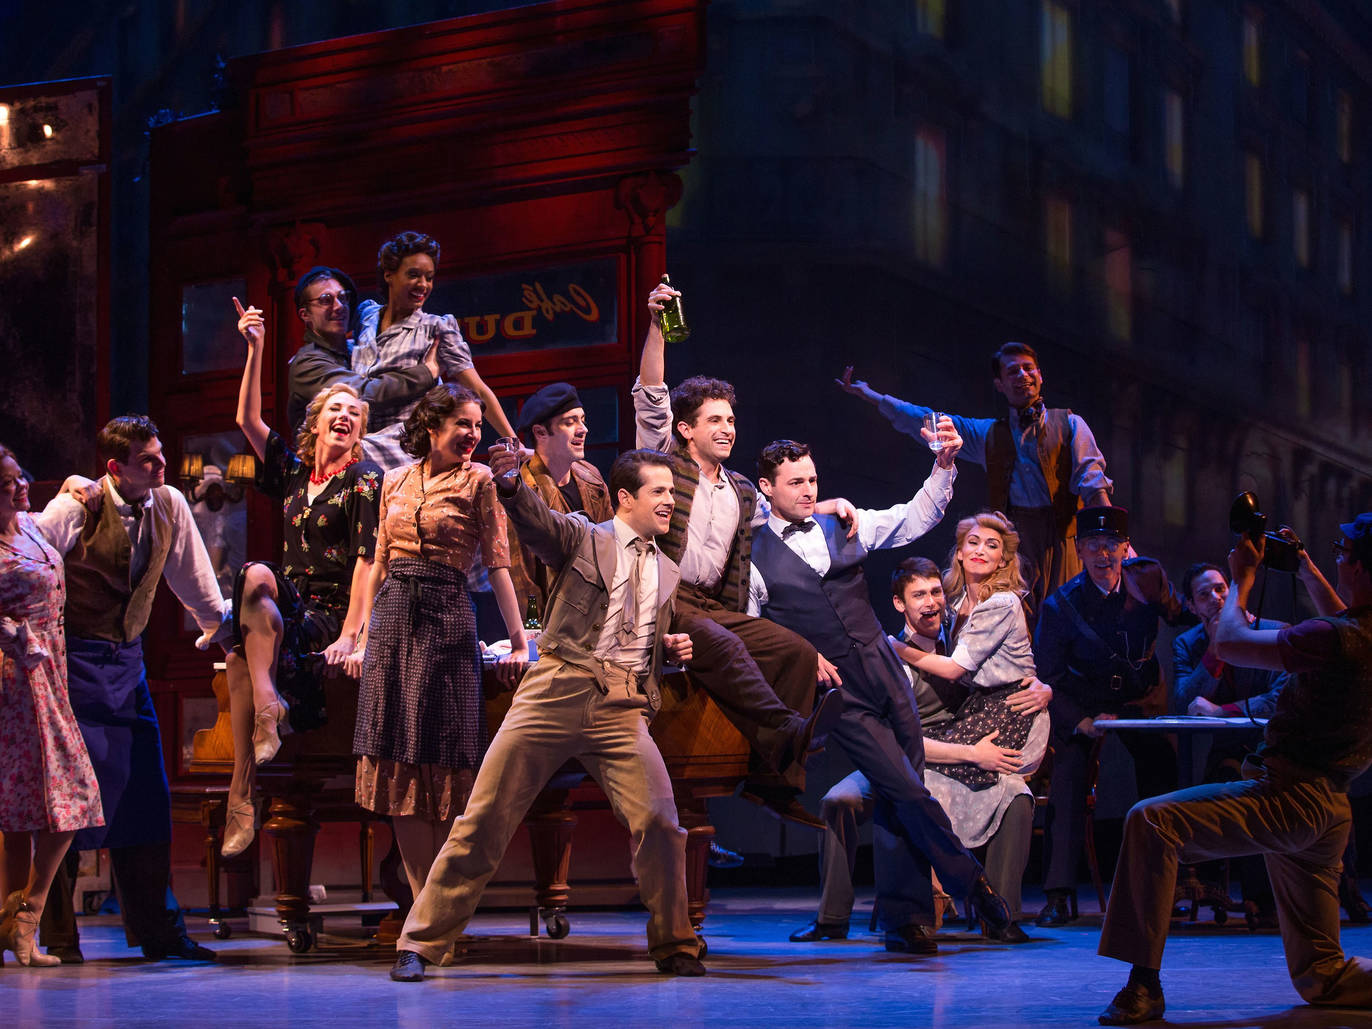 List of Broadway shows to book tickets in advance